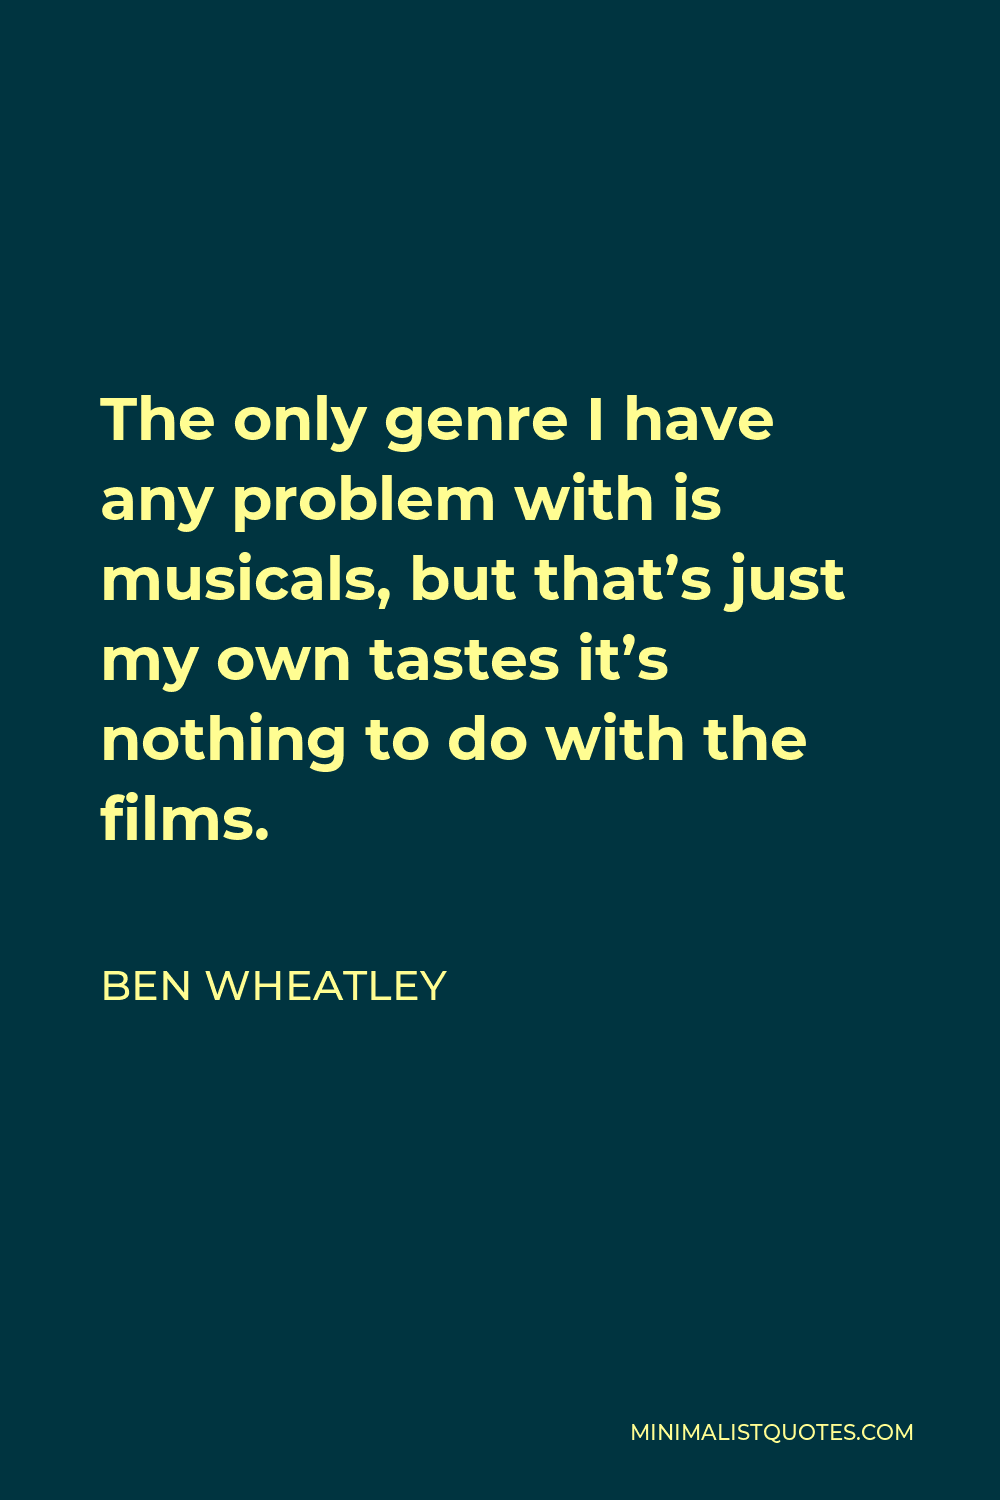 Ben Wheatley Quote - The only genre I have any problem with is musicals, but that’s just my own tastes it’s nothing to do with the films.